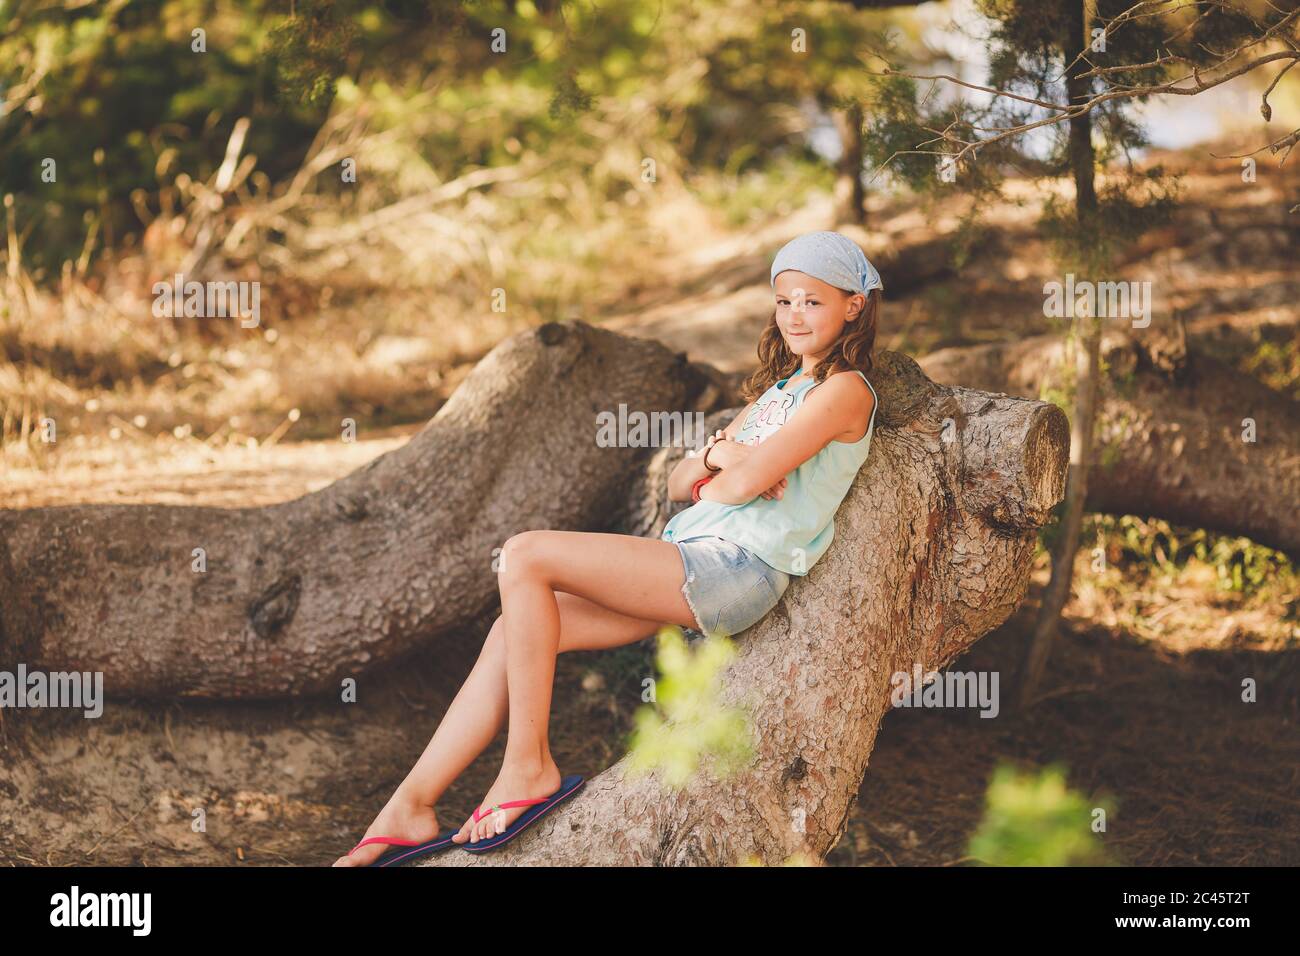 One young girl sitting on a tree trunk on a sunny evening Stock Photo